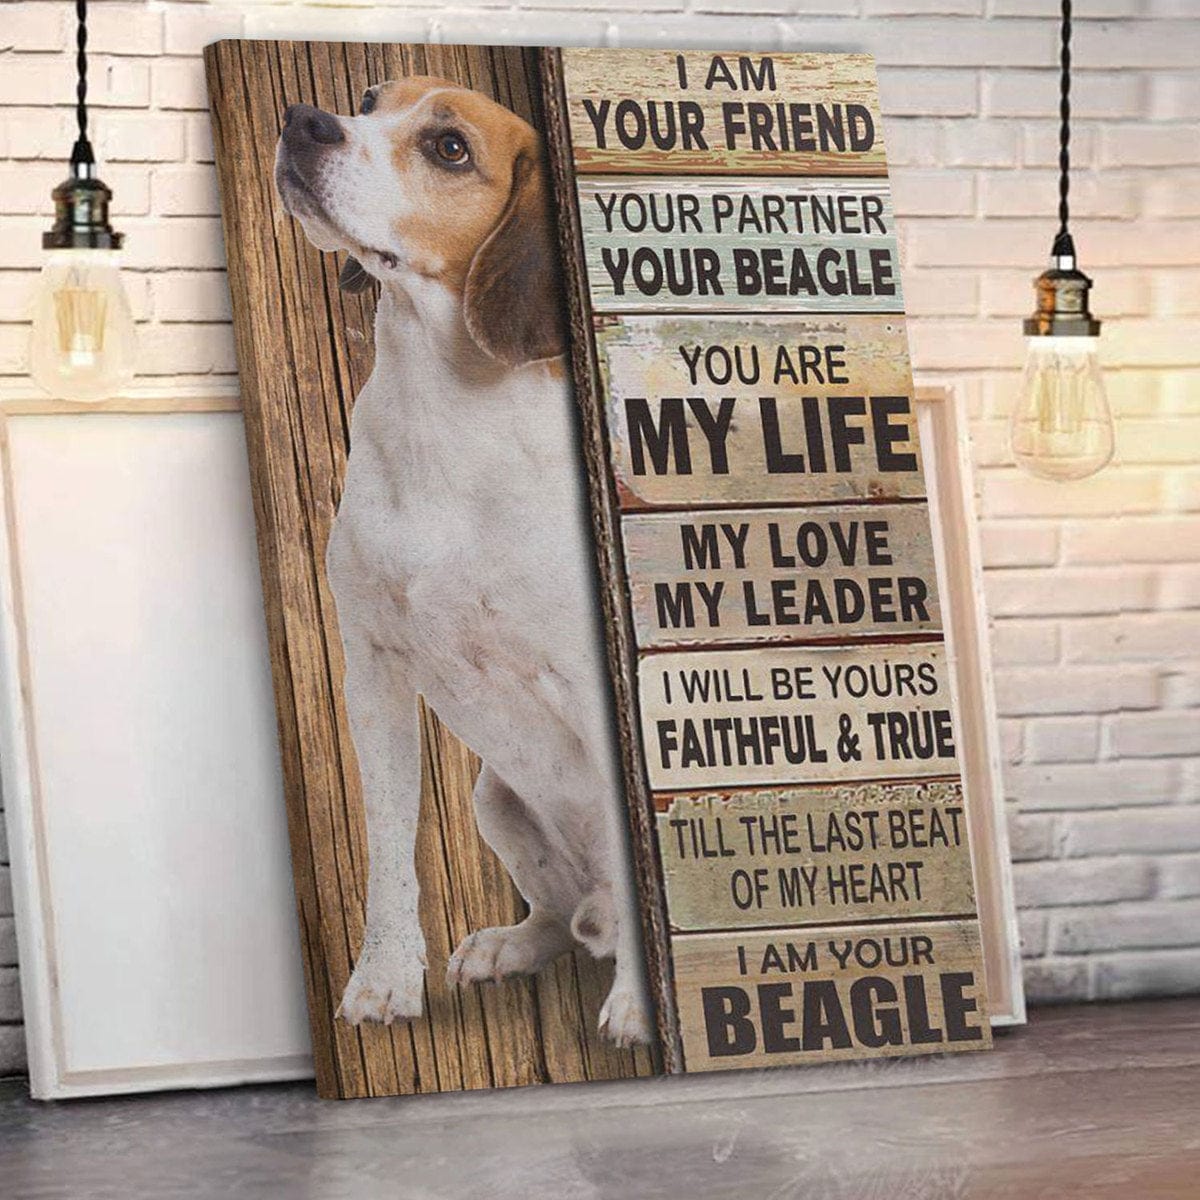 Beagle Poster, I Am Your Friend Your Partner Your Beagle, Beagle Canvas Wall Print Art